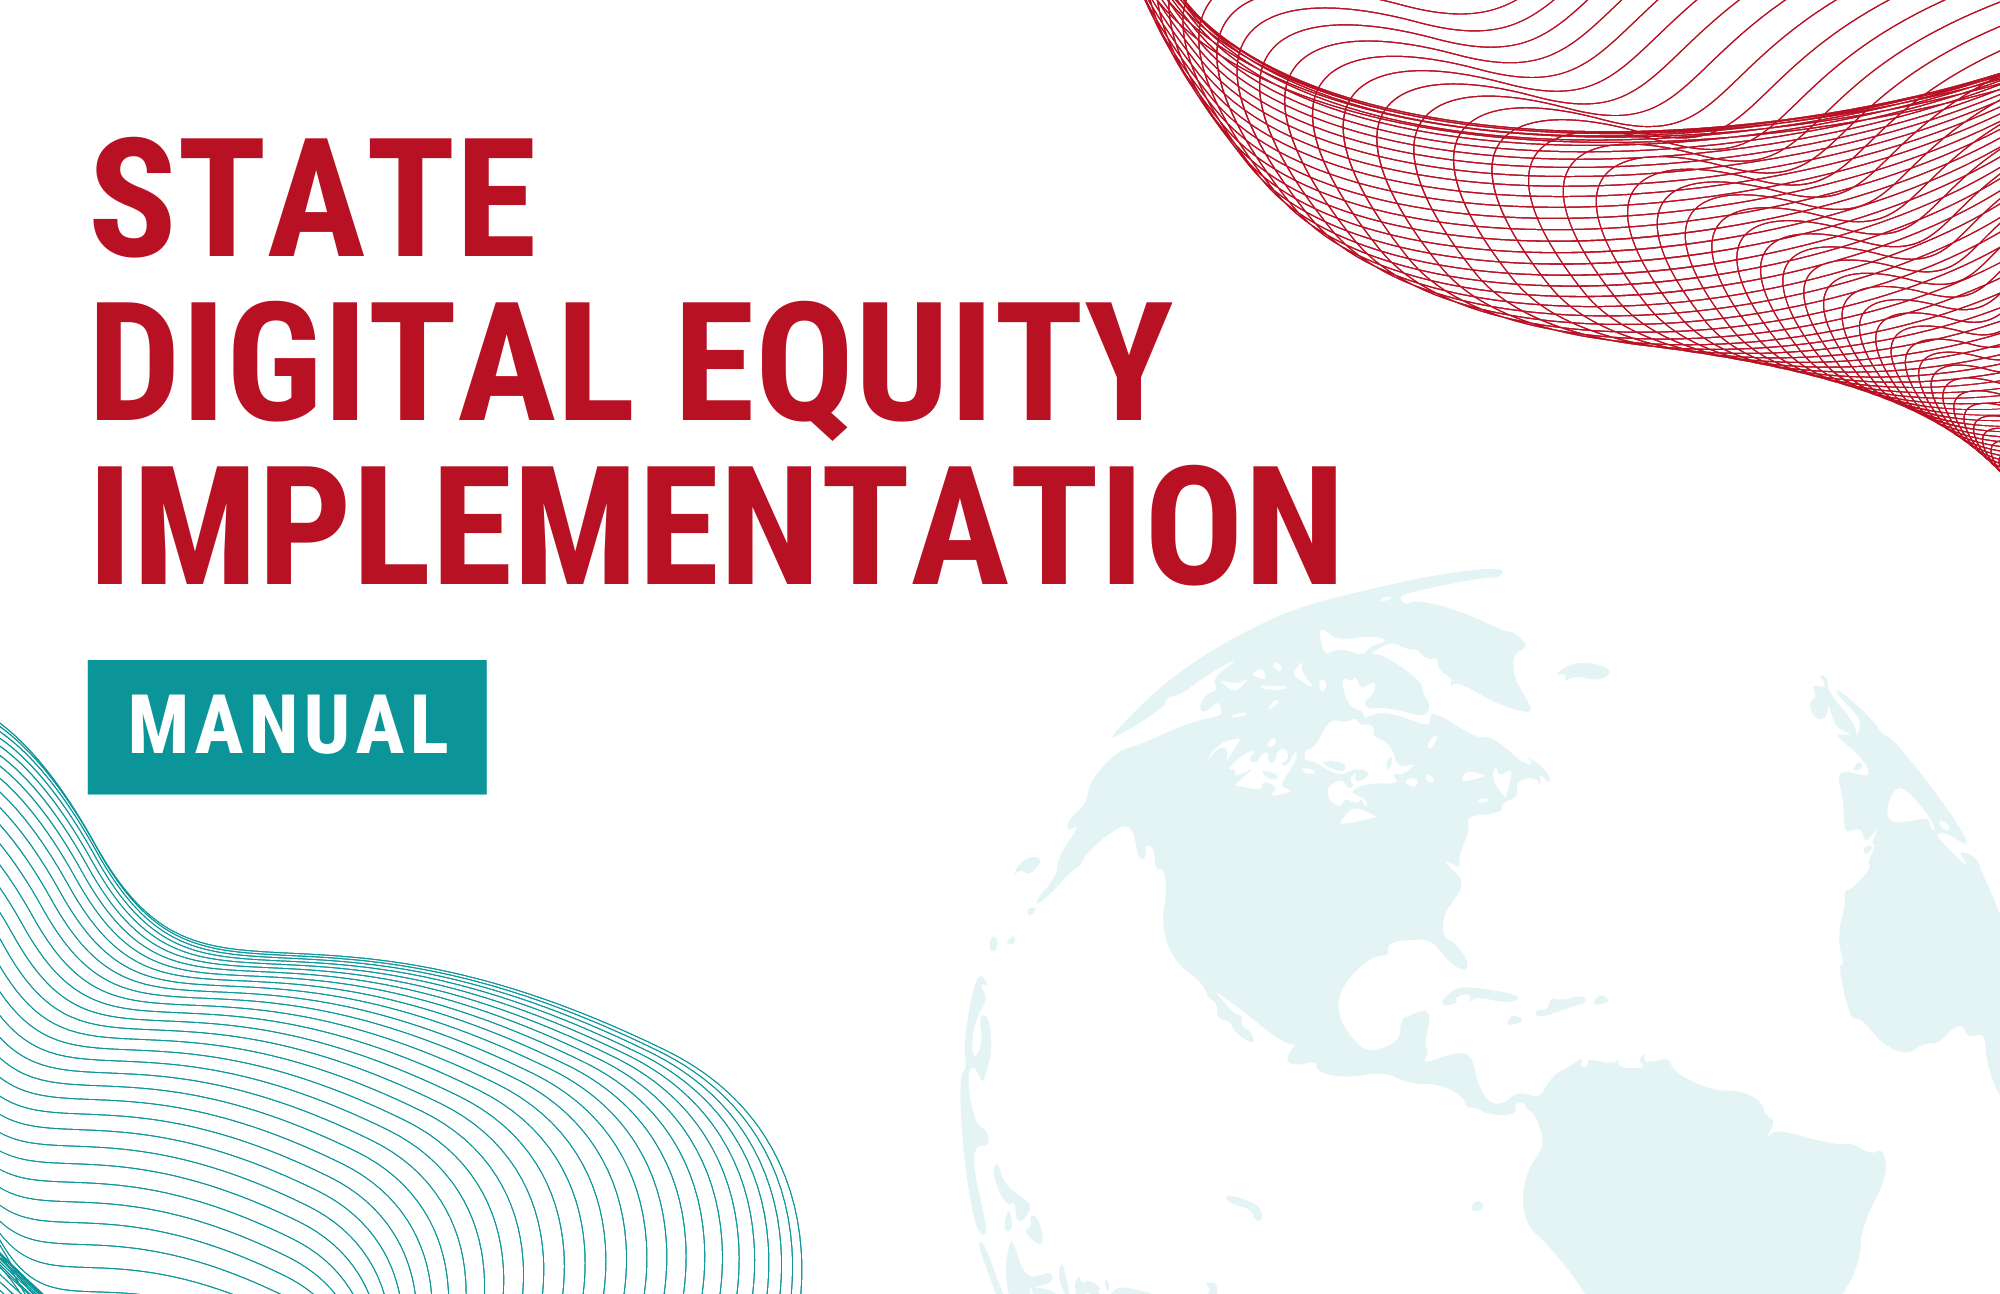 State Digital Equity Implementation Manual banner